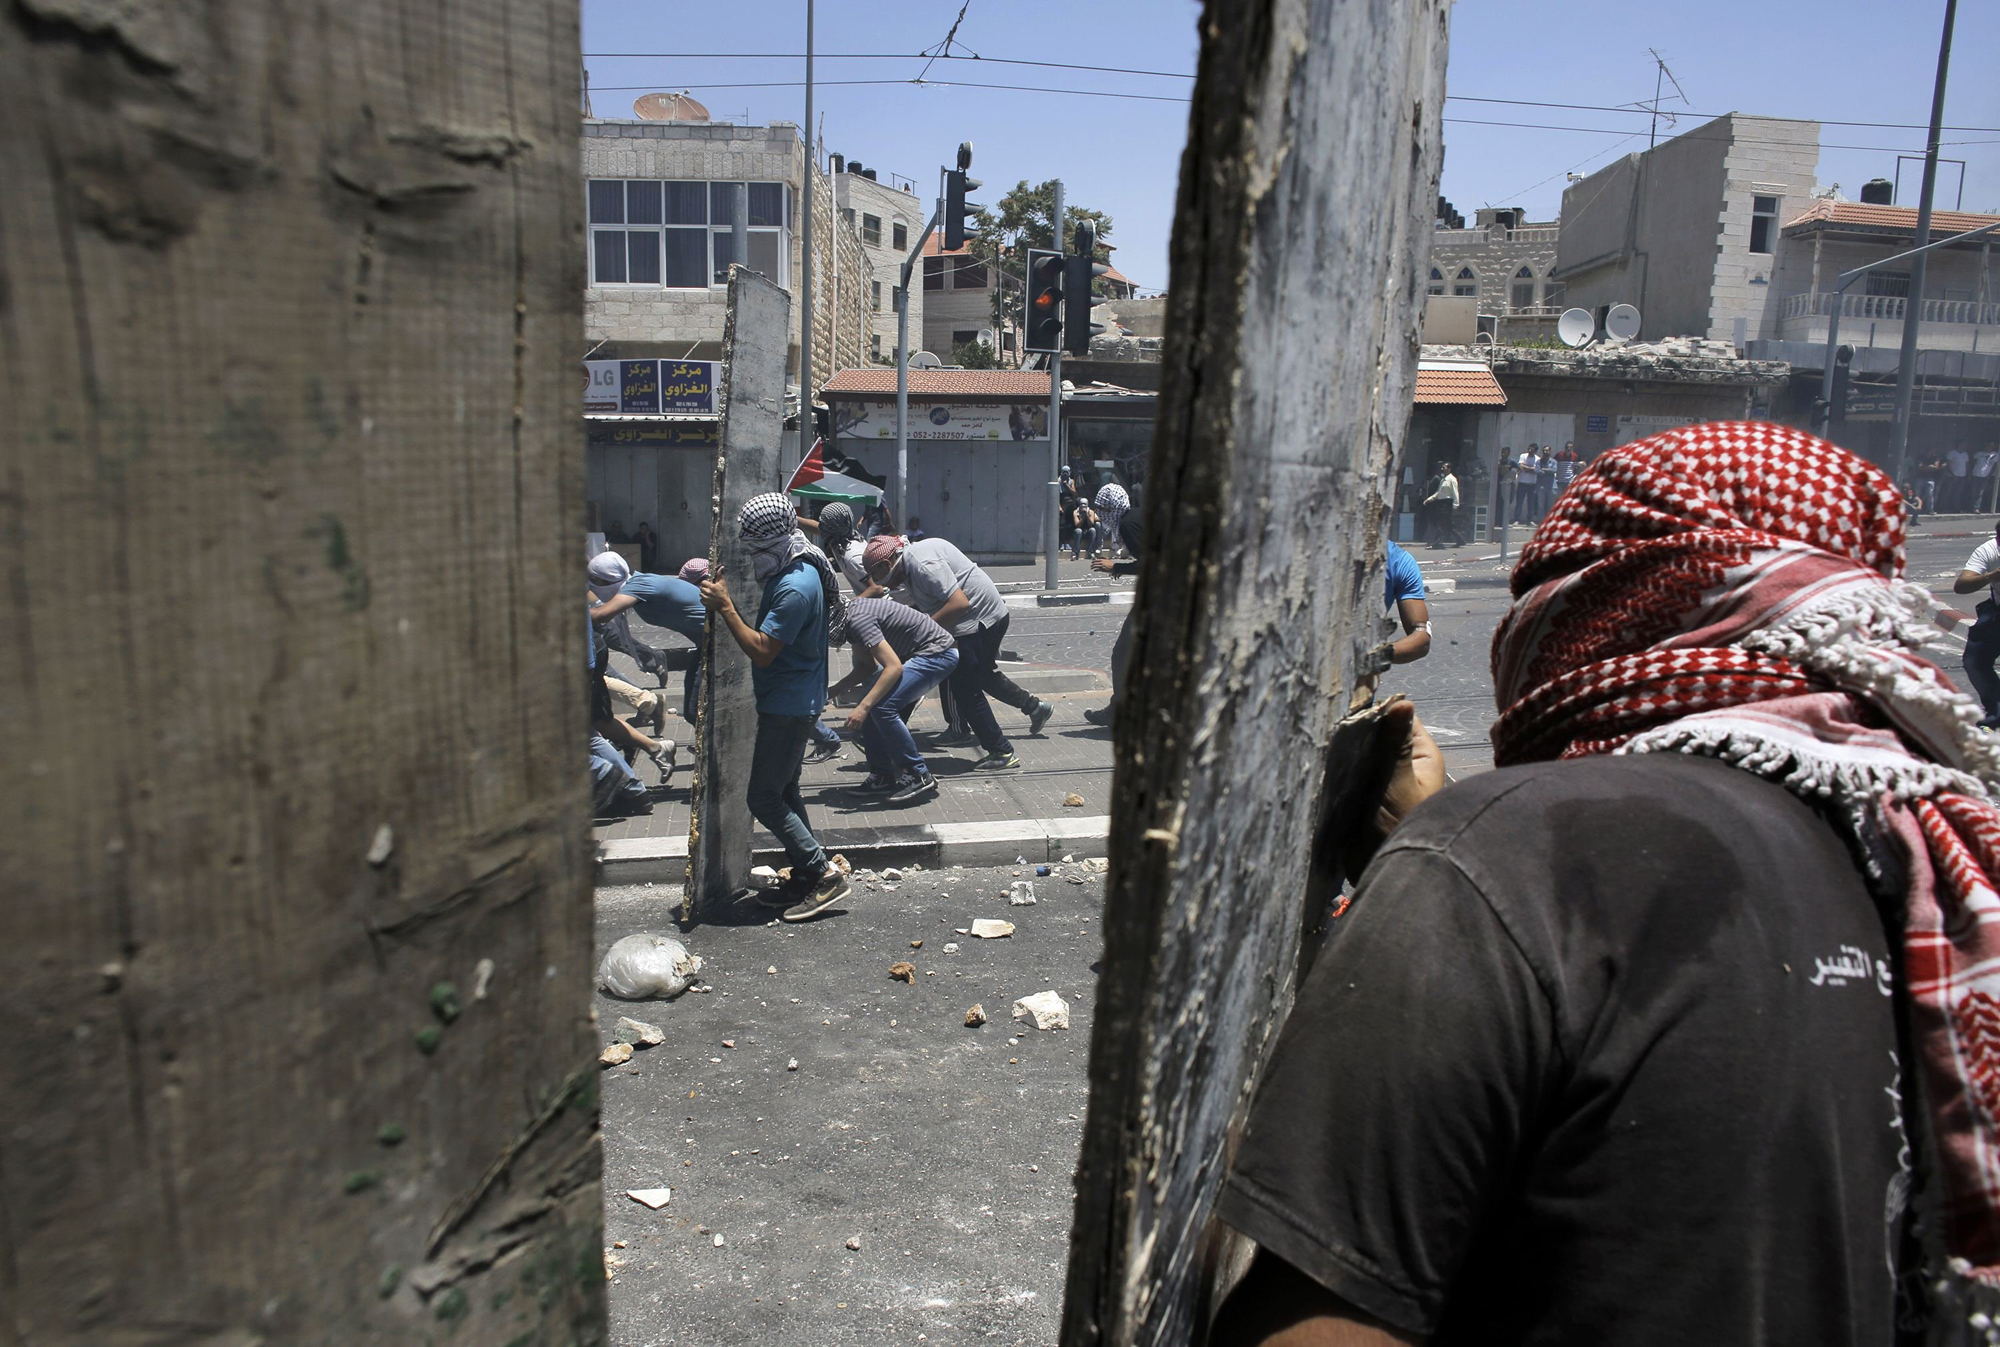 Palestinian stone-throwers take cover during clashes with Israeli police in Shuafat, an Arab suburb of Jerusalem, July 2.